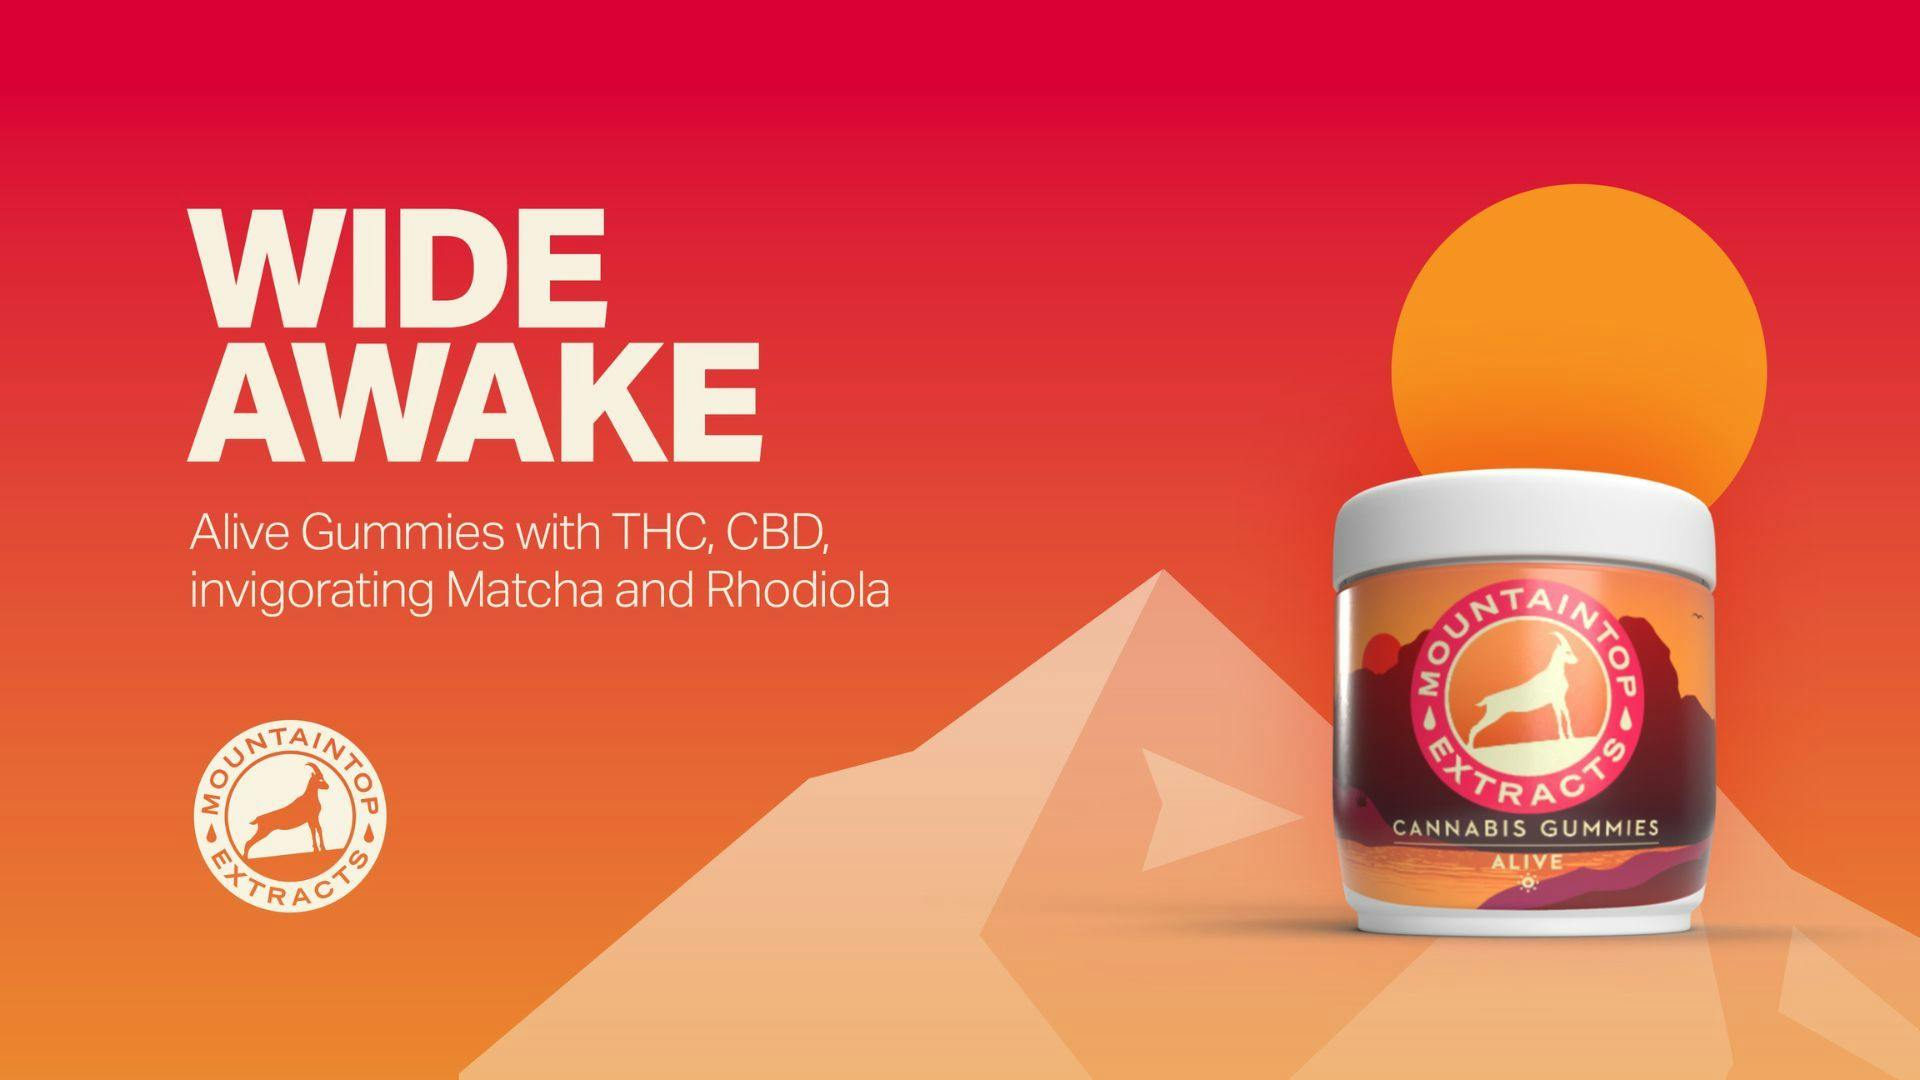 an orange graphic of mountains, a sun and "Alive" gummies from Mountaintop Extracts. The headline is Wide Awake.